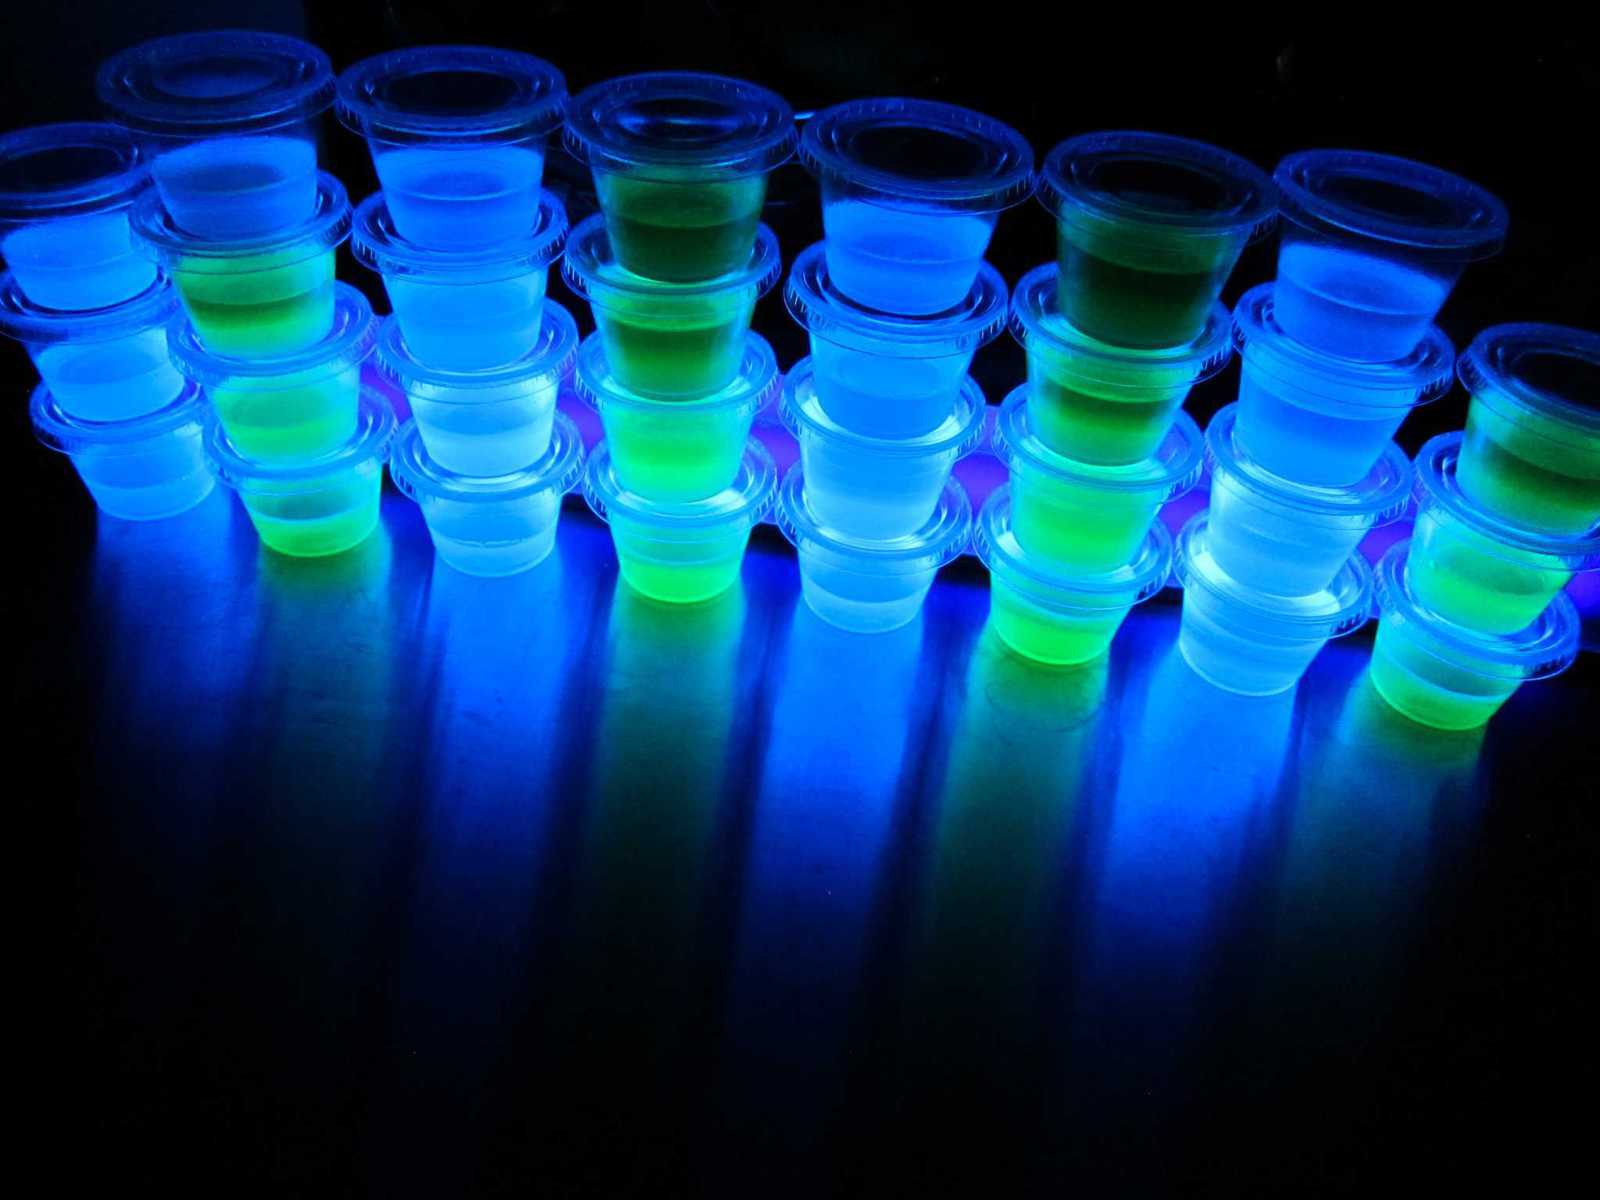 How to Make Glow-in-the-Dark Jell-O